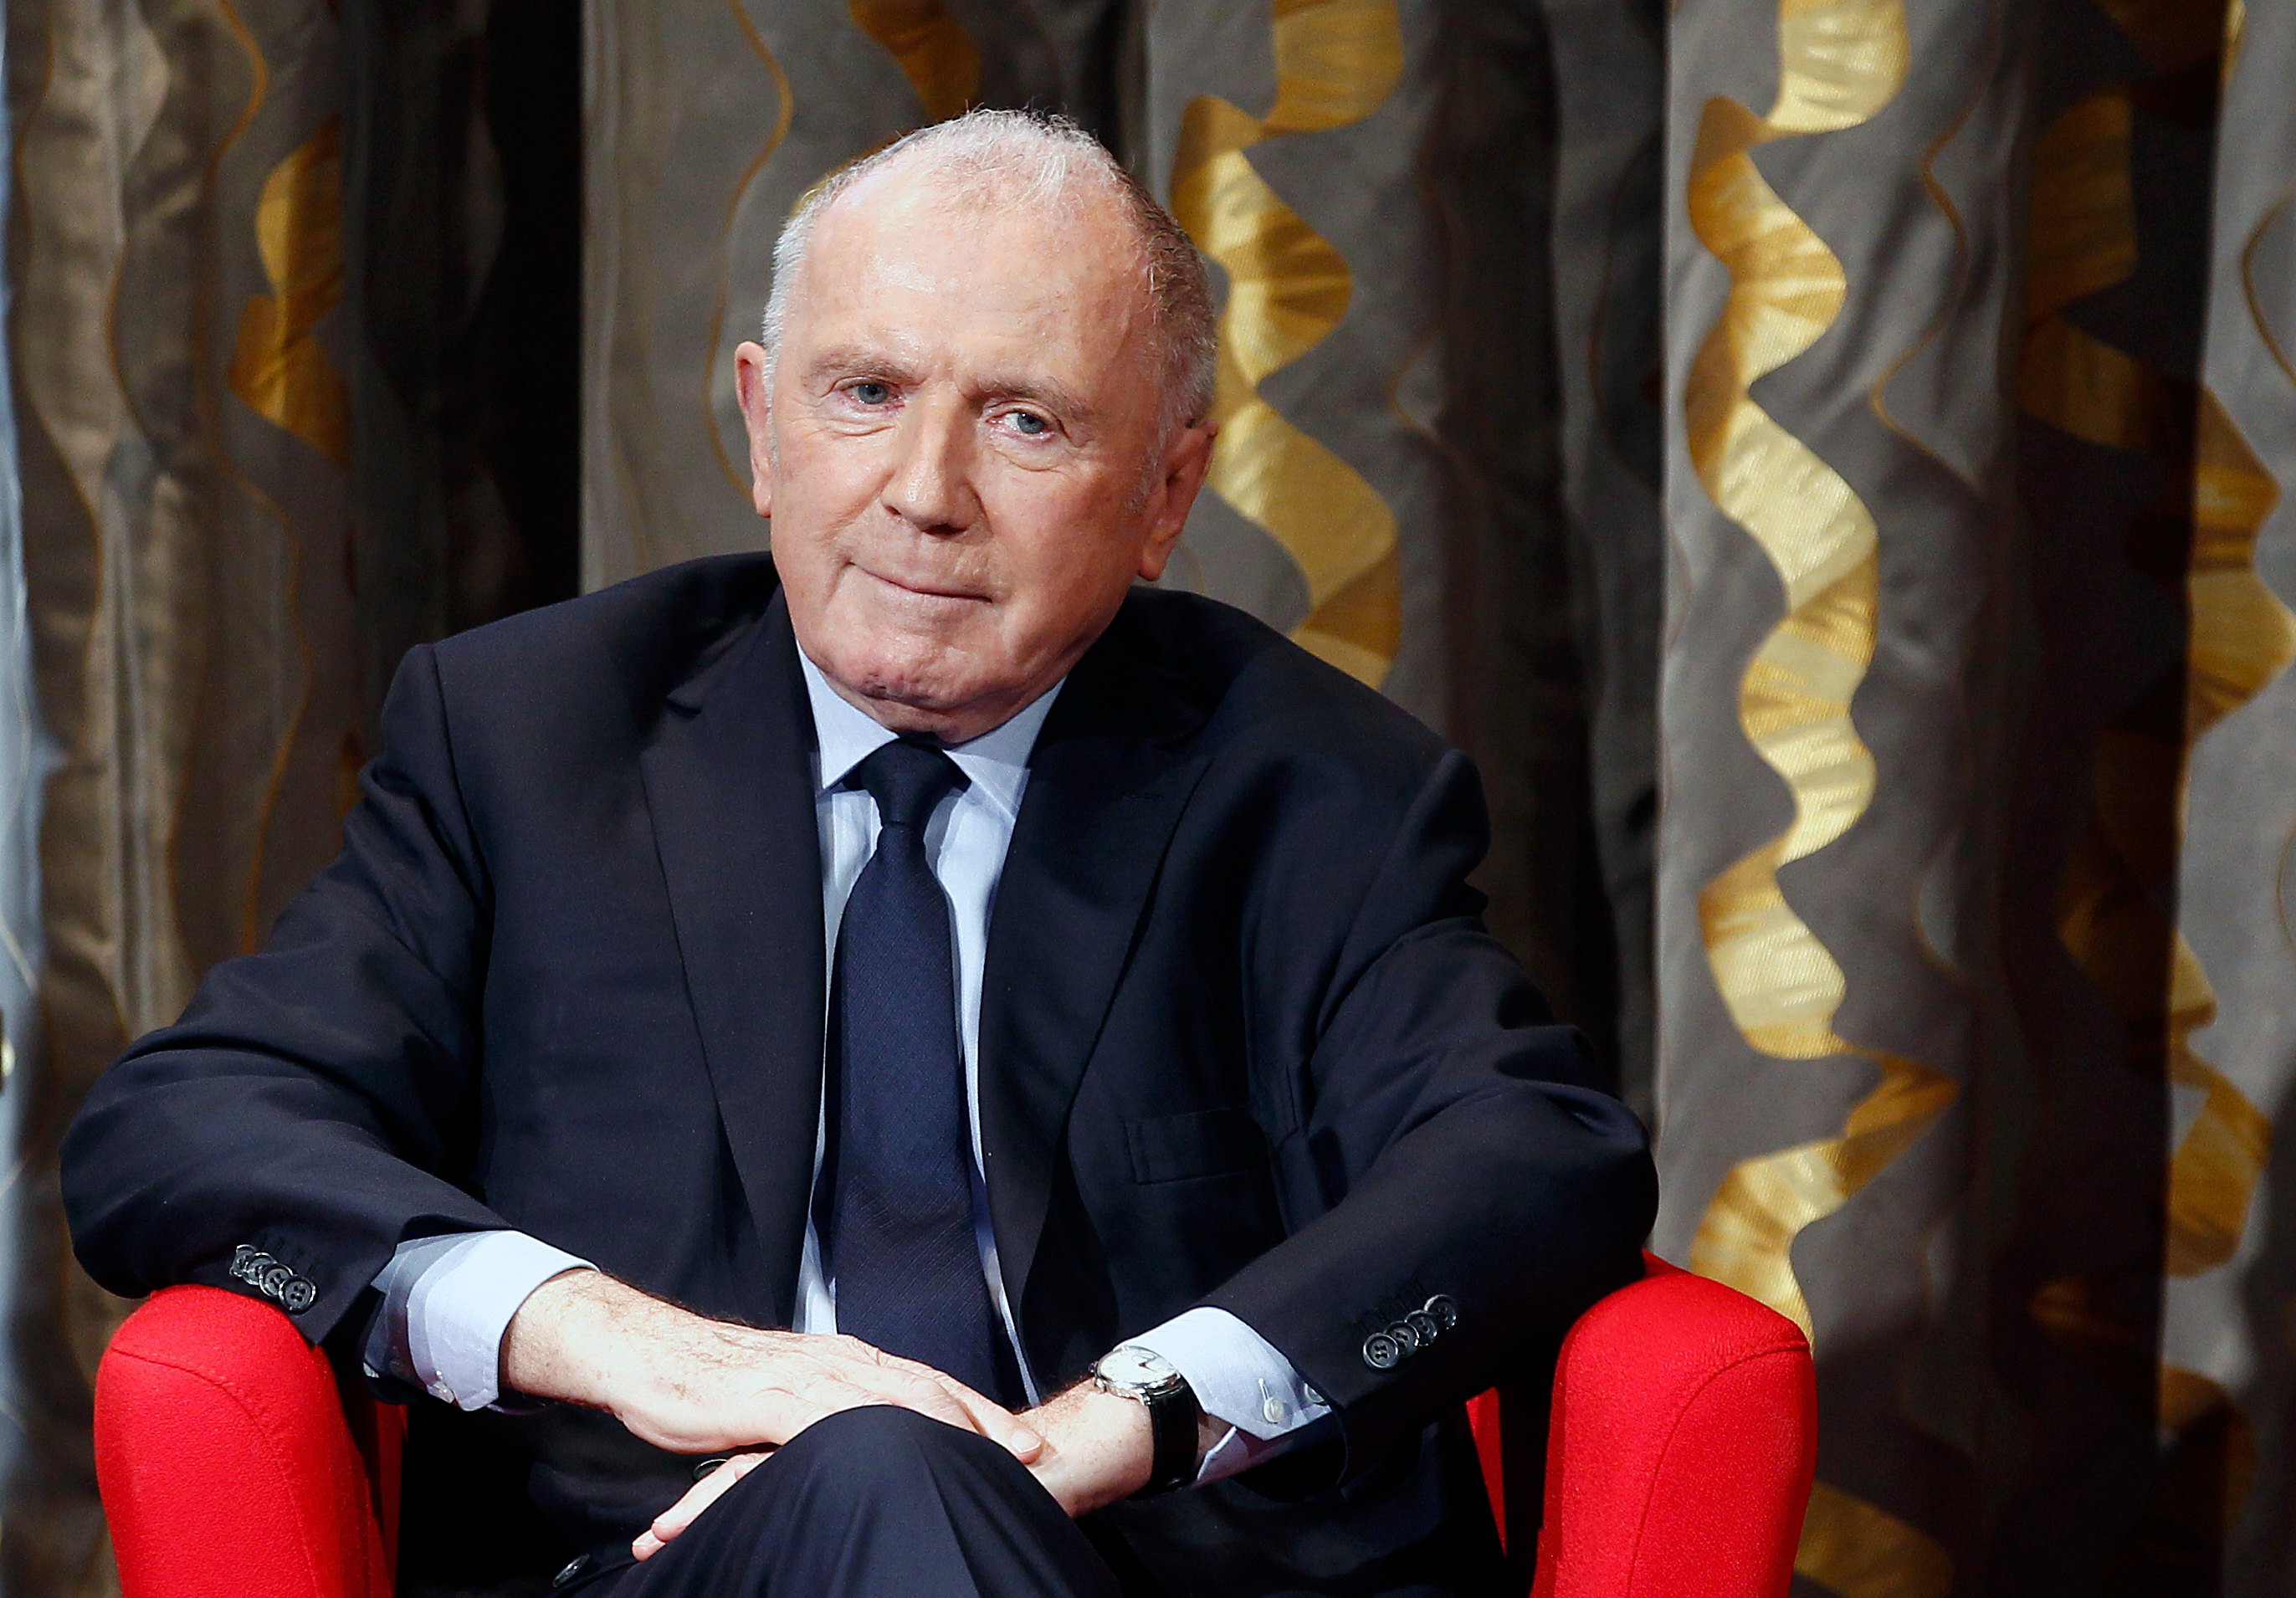 Billionaire owner of LVMH appoints daughter to run Dior